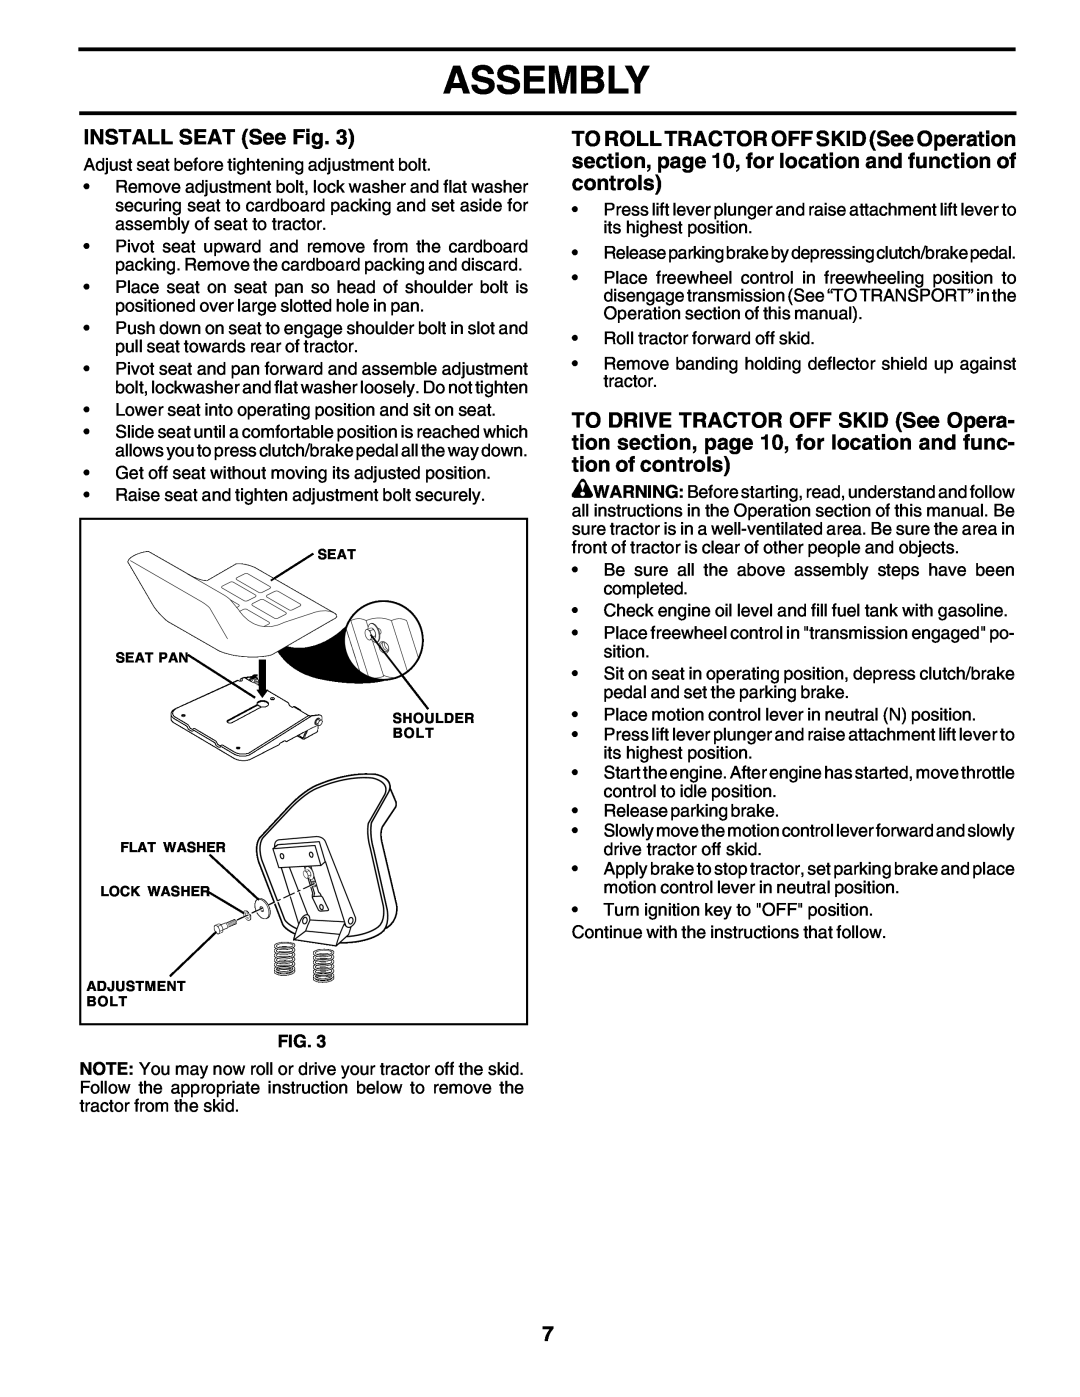 Poulan 178379 owner manual INSTALL SEAT See Fig, Assembly 